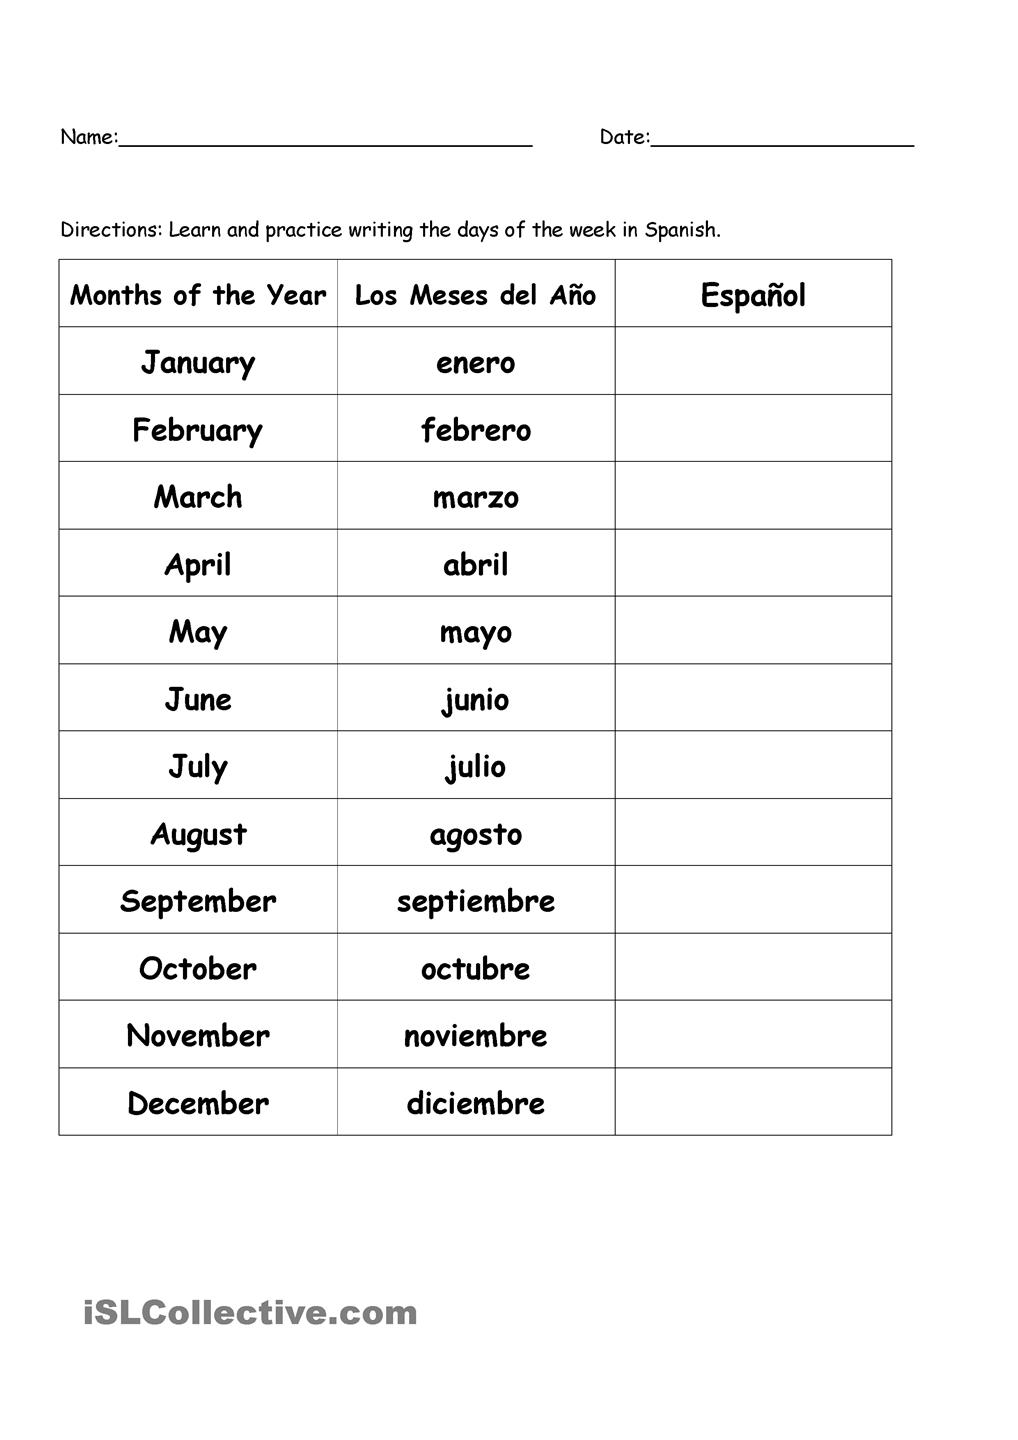 free-printable-spanish-months-of-the-year-printable-templates